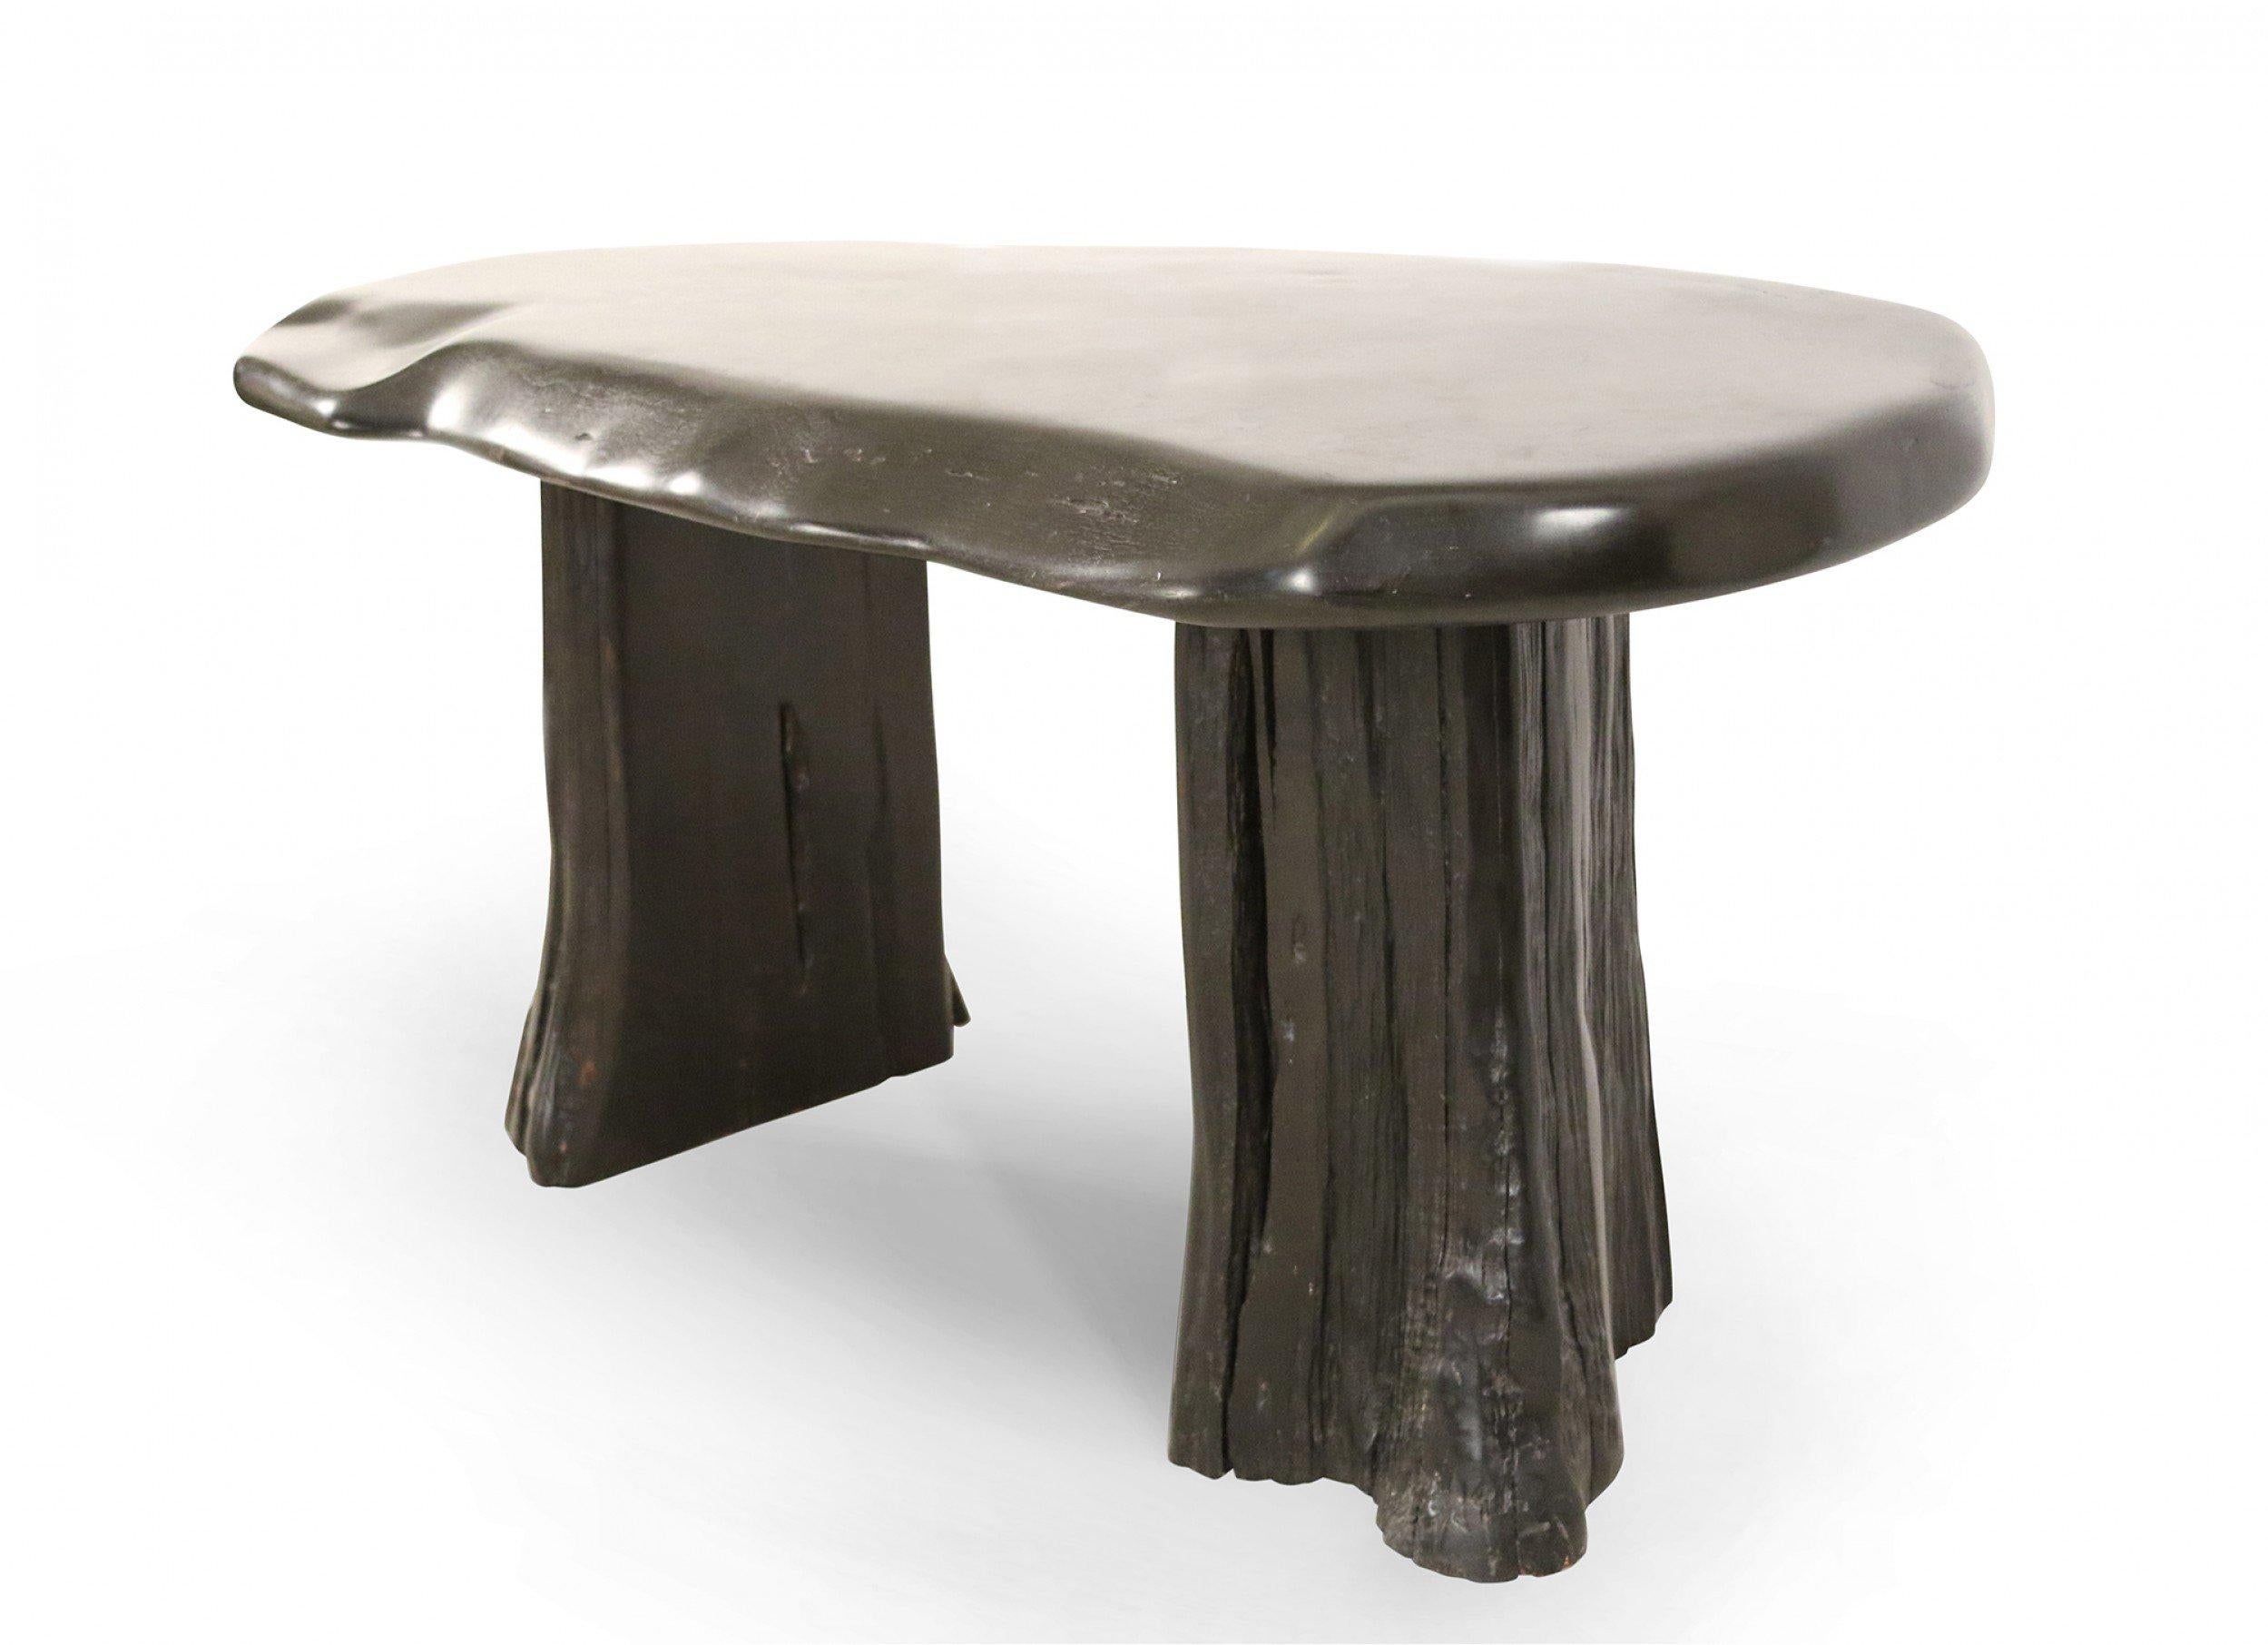 20th Century Contemporary Black Painted Tree Trunk Design Desk or Console Table For Sale